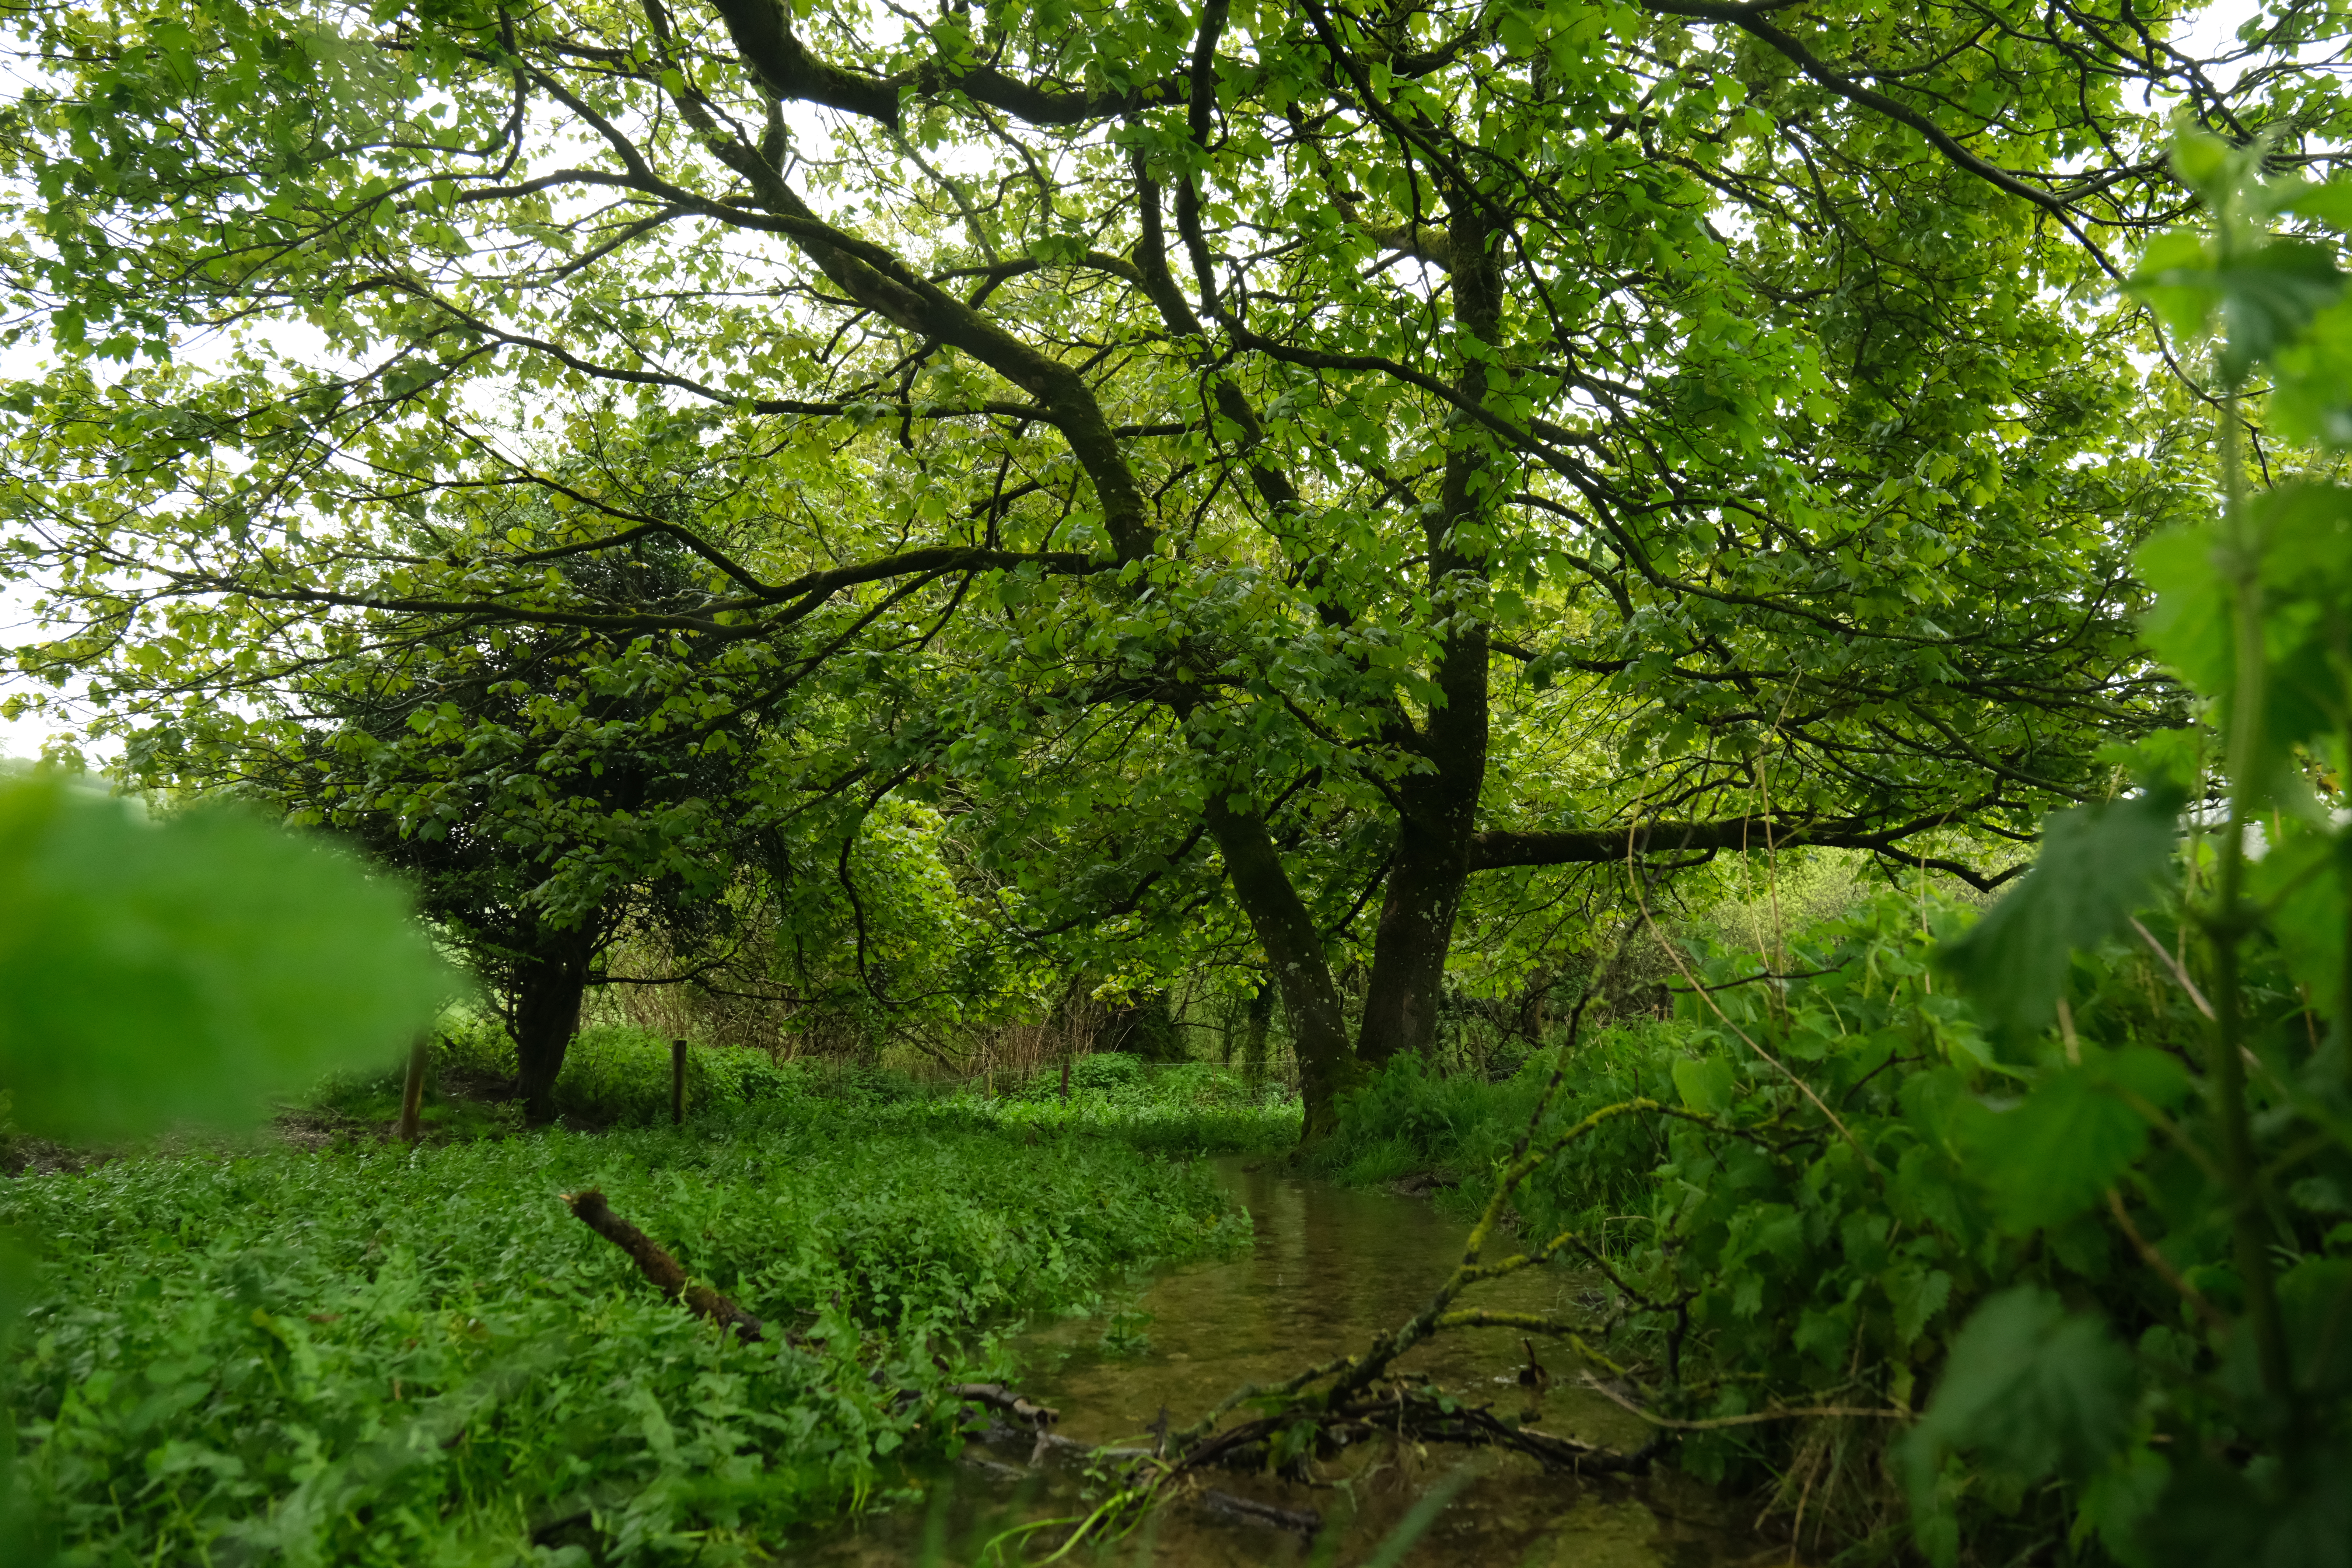 A view of trees and a stream with vegetation in spring at Lyscombe